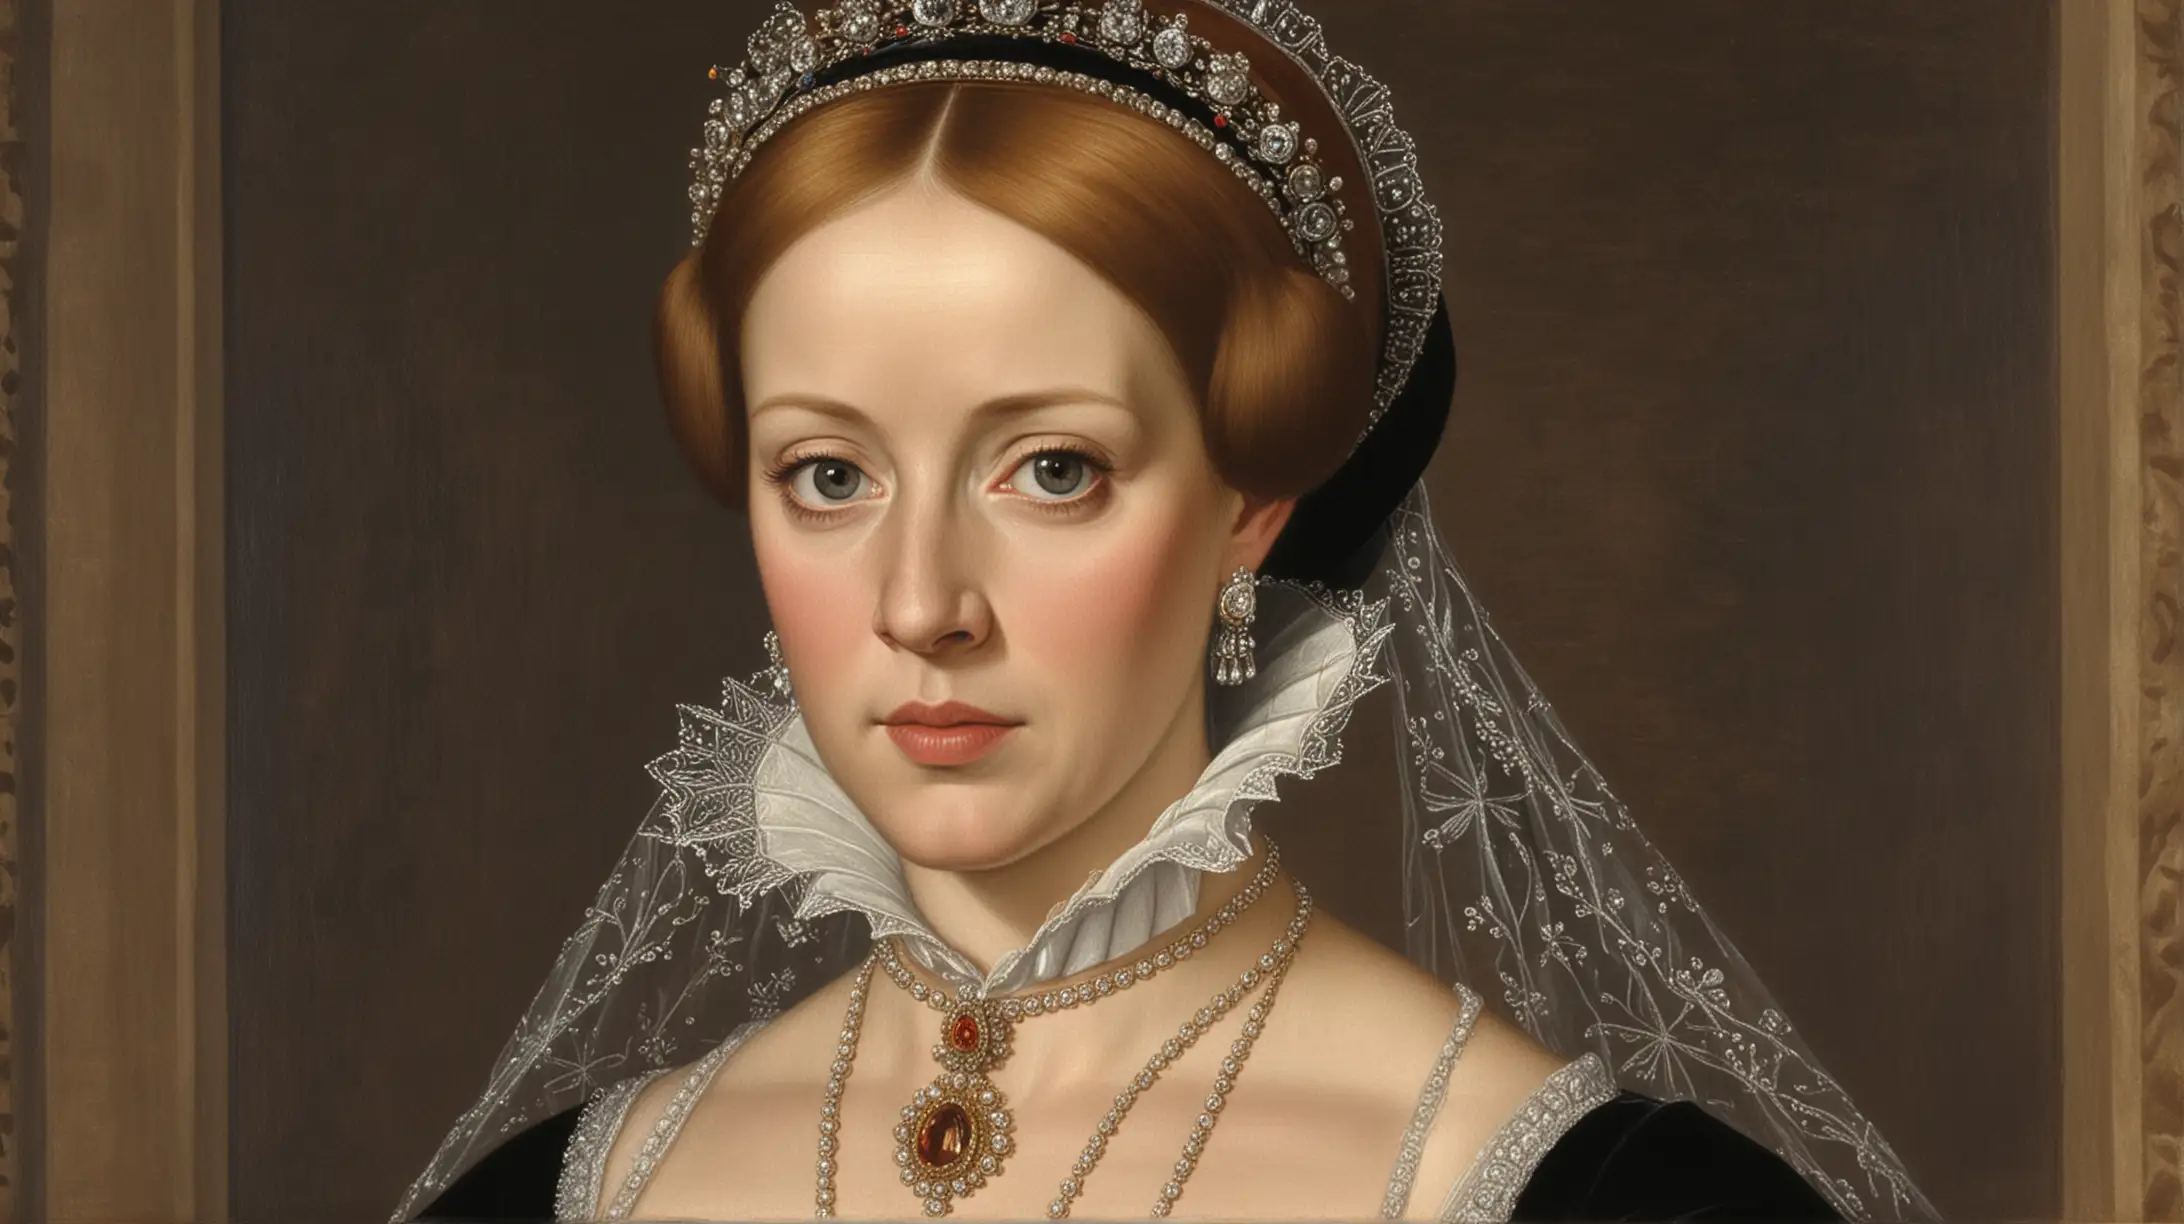 Queen Mary I of England during the Persecution Era